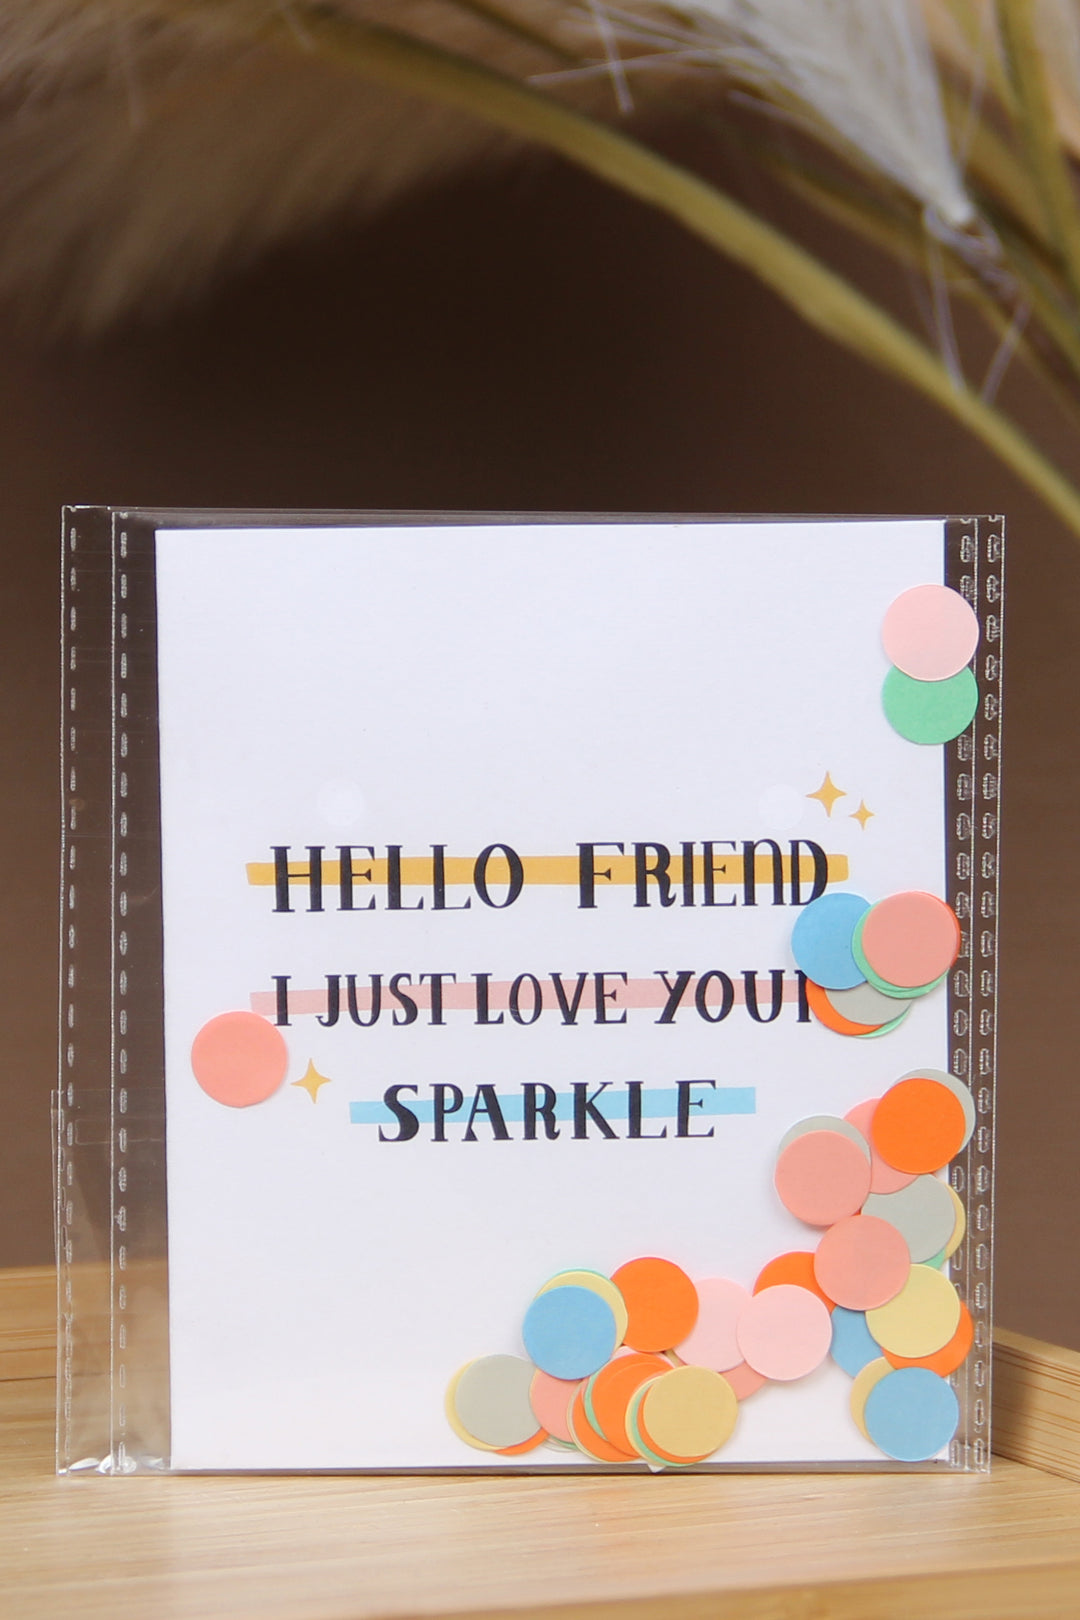 The Gift Label Kort Confetti Greeting Card - Hello Friend I Just Love Your Sparkle V2